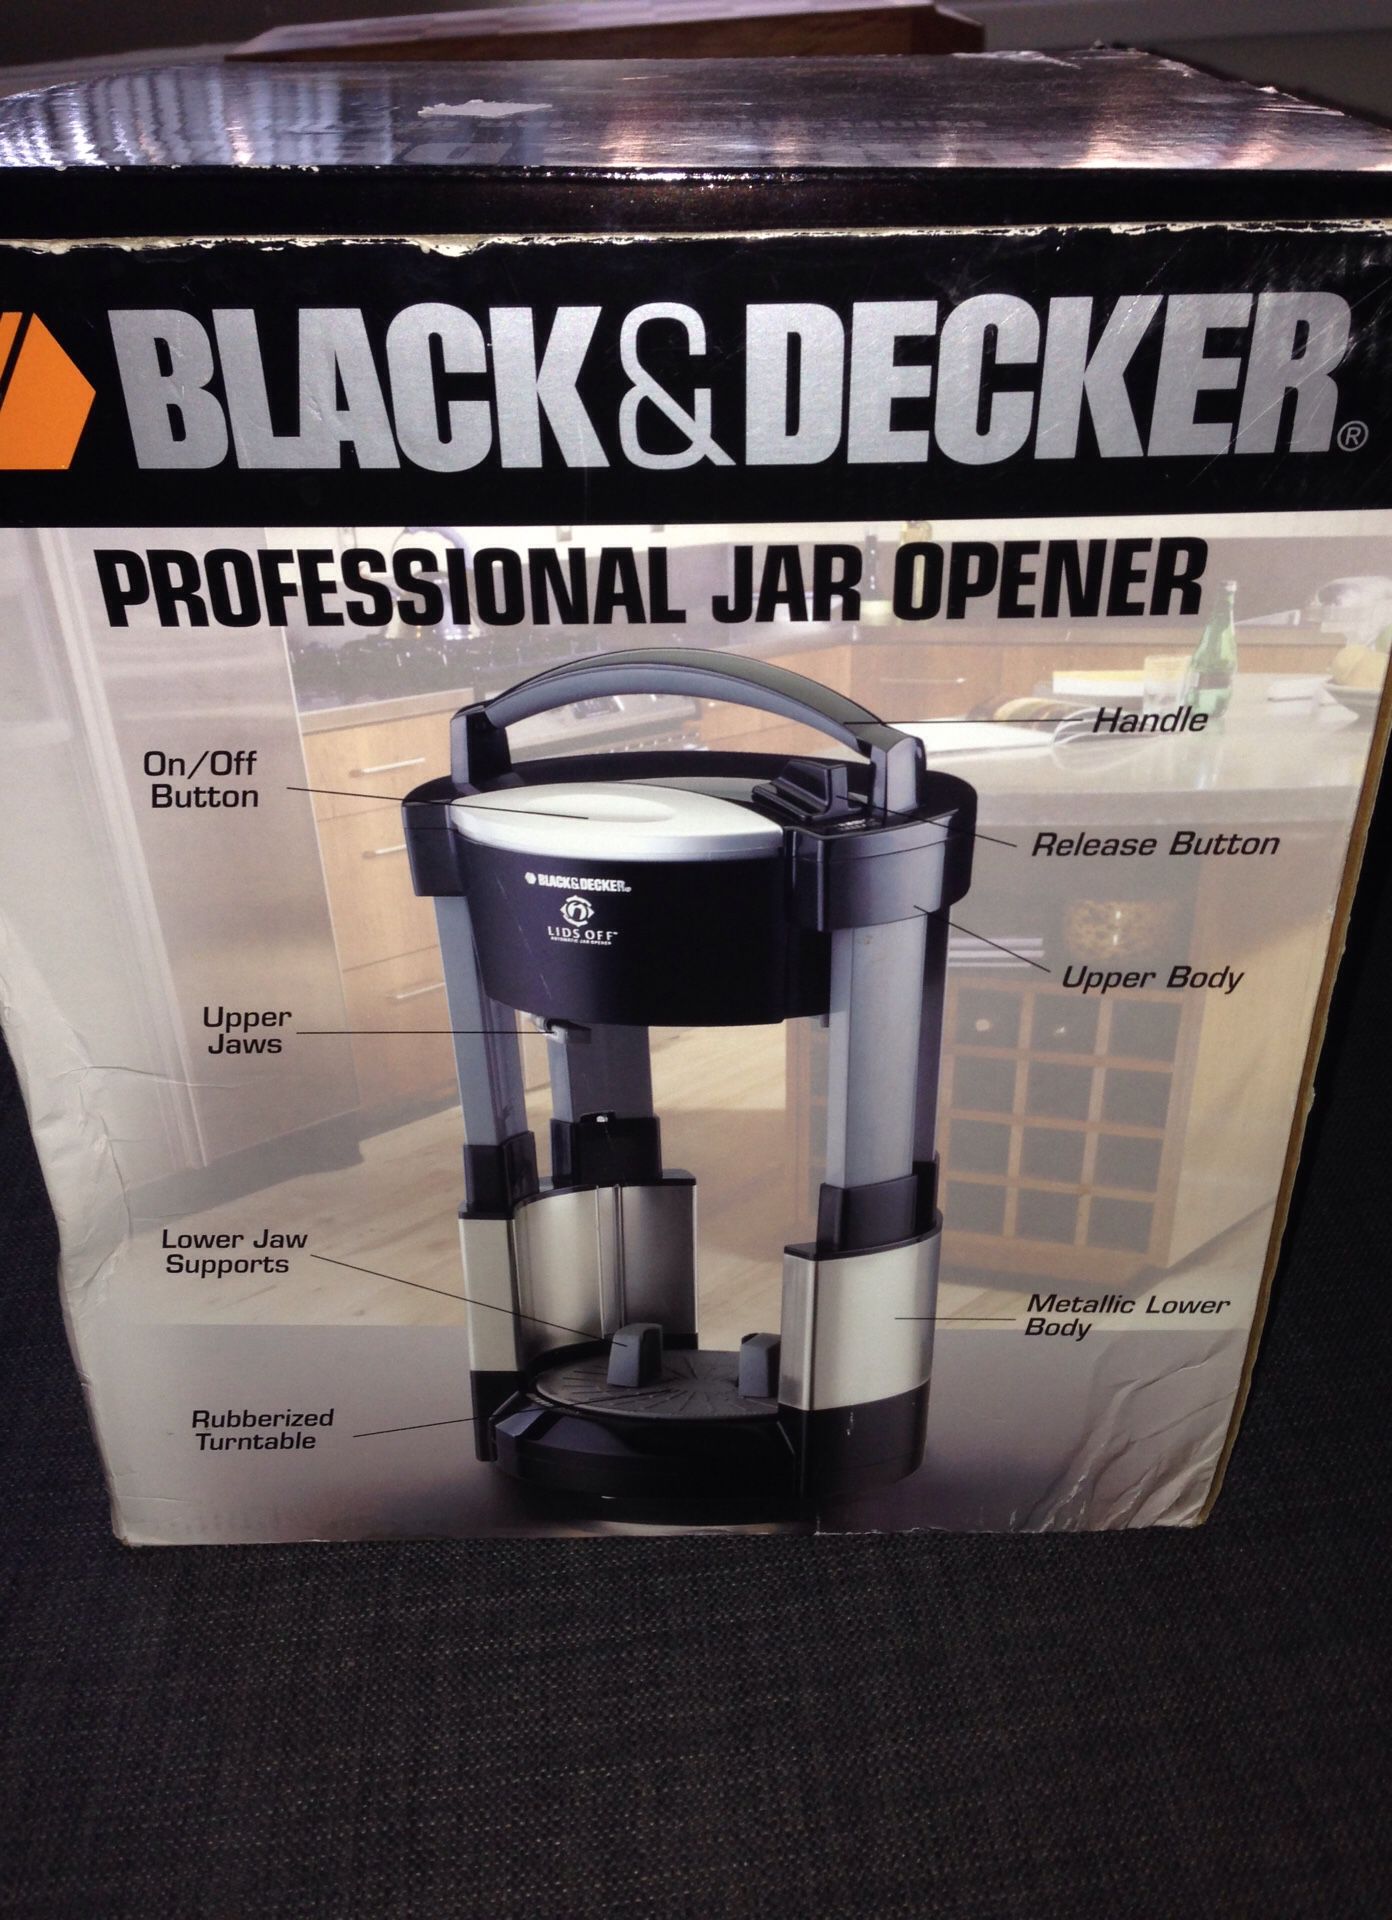 Brand Name is Black & Decker Professional Jar Opener. Please See All The Pictures and Read the description